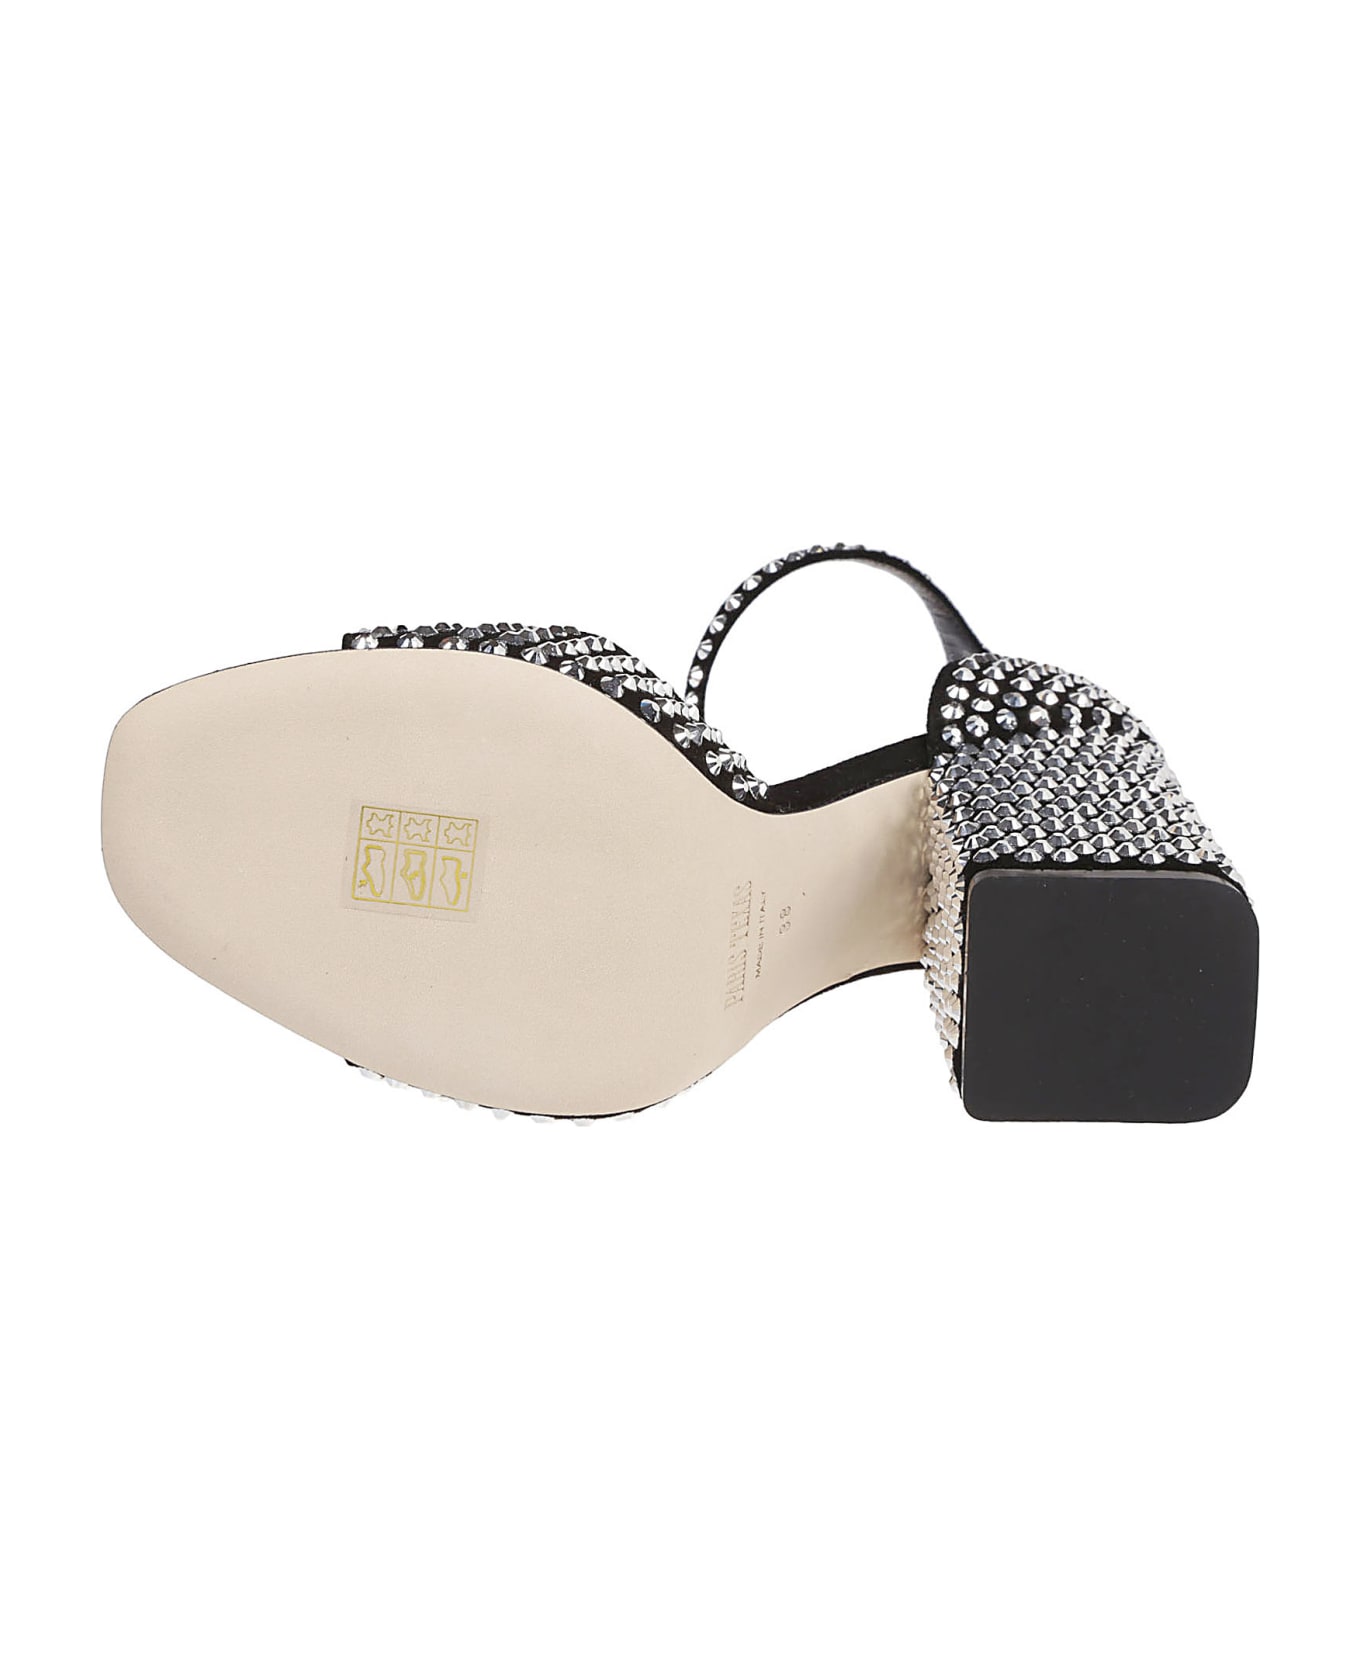 Paris Texas Holly Fiona Sandals - Tread s unisex sneakers rival those of its competitors